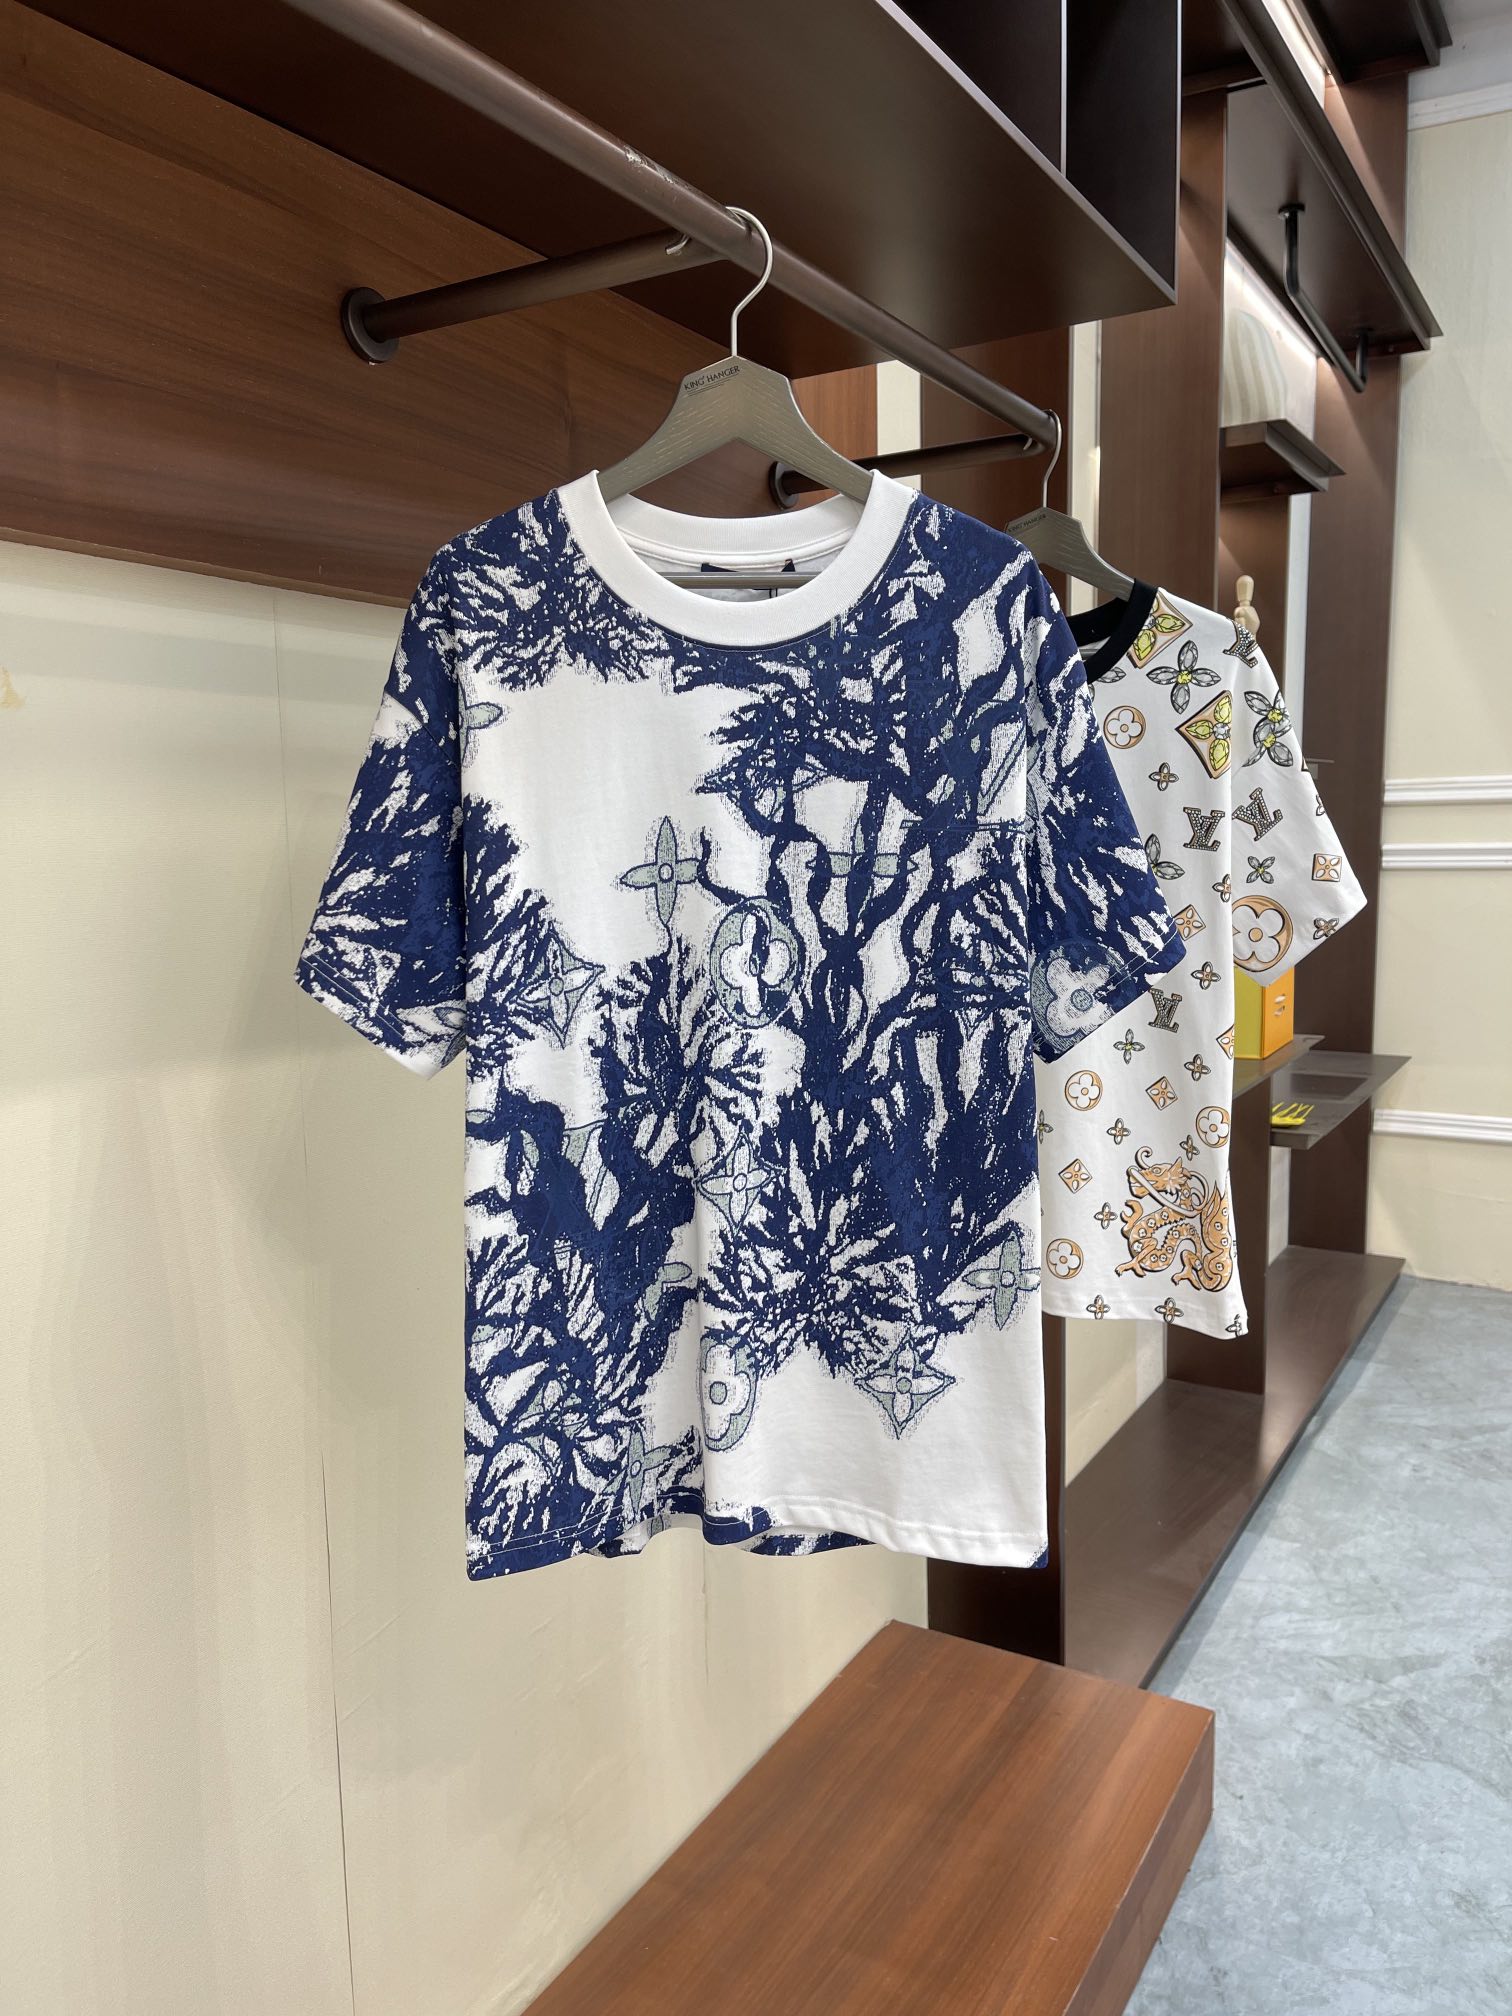 Louis Vuitton 1:1
 Clothing T-Shirt Weave Cotton Spring/Summer Collection Fashion Short Sleeve